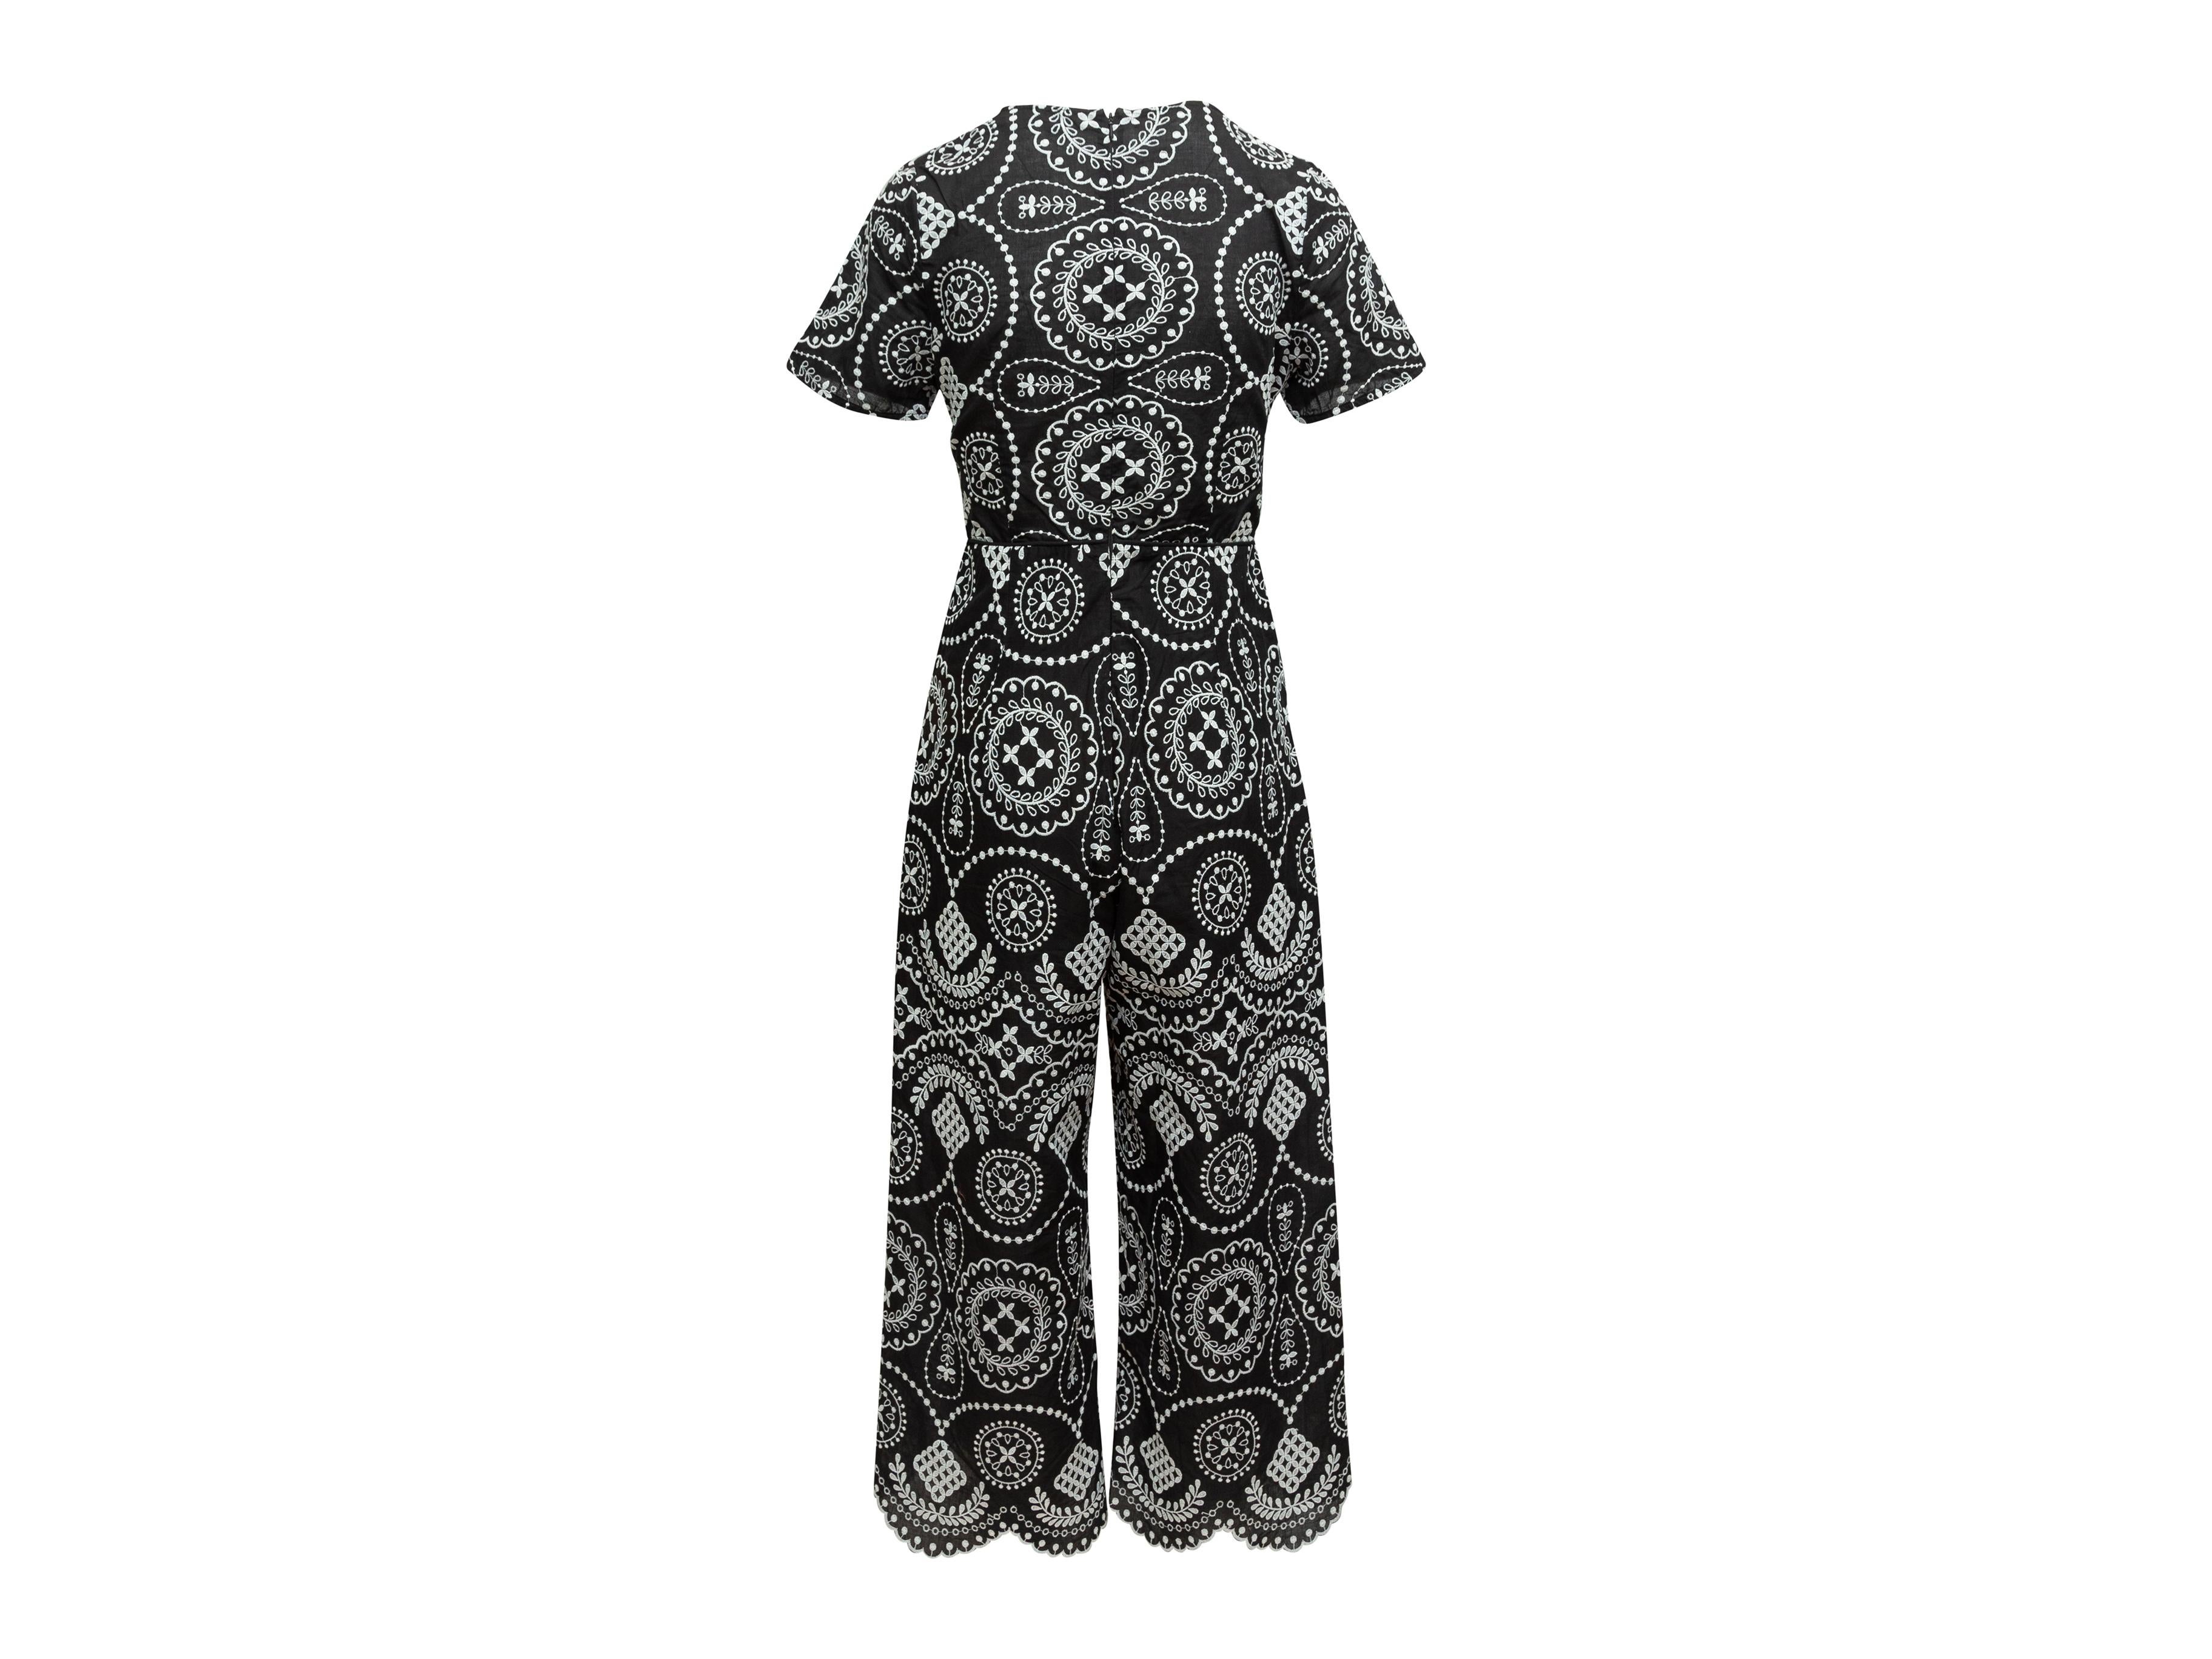 Product details: Black and white jumpsuit by Alice McCall. Embroidery throughout. Crew neck. Short sleeves. Zip closure at back. Designer size 8. 28